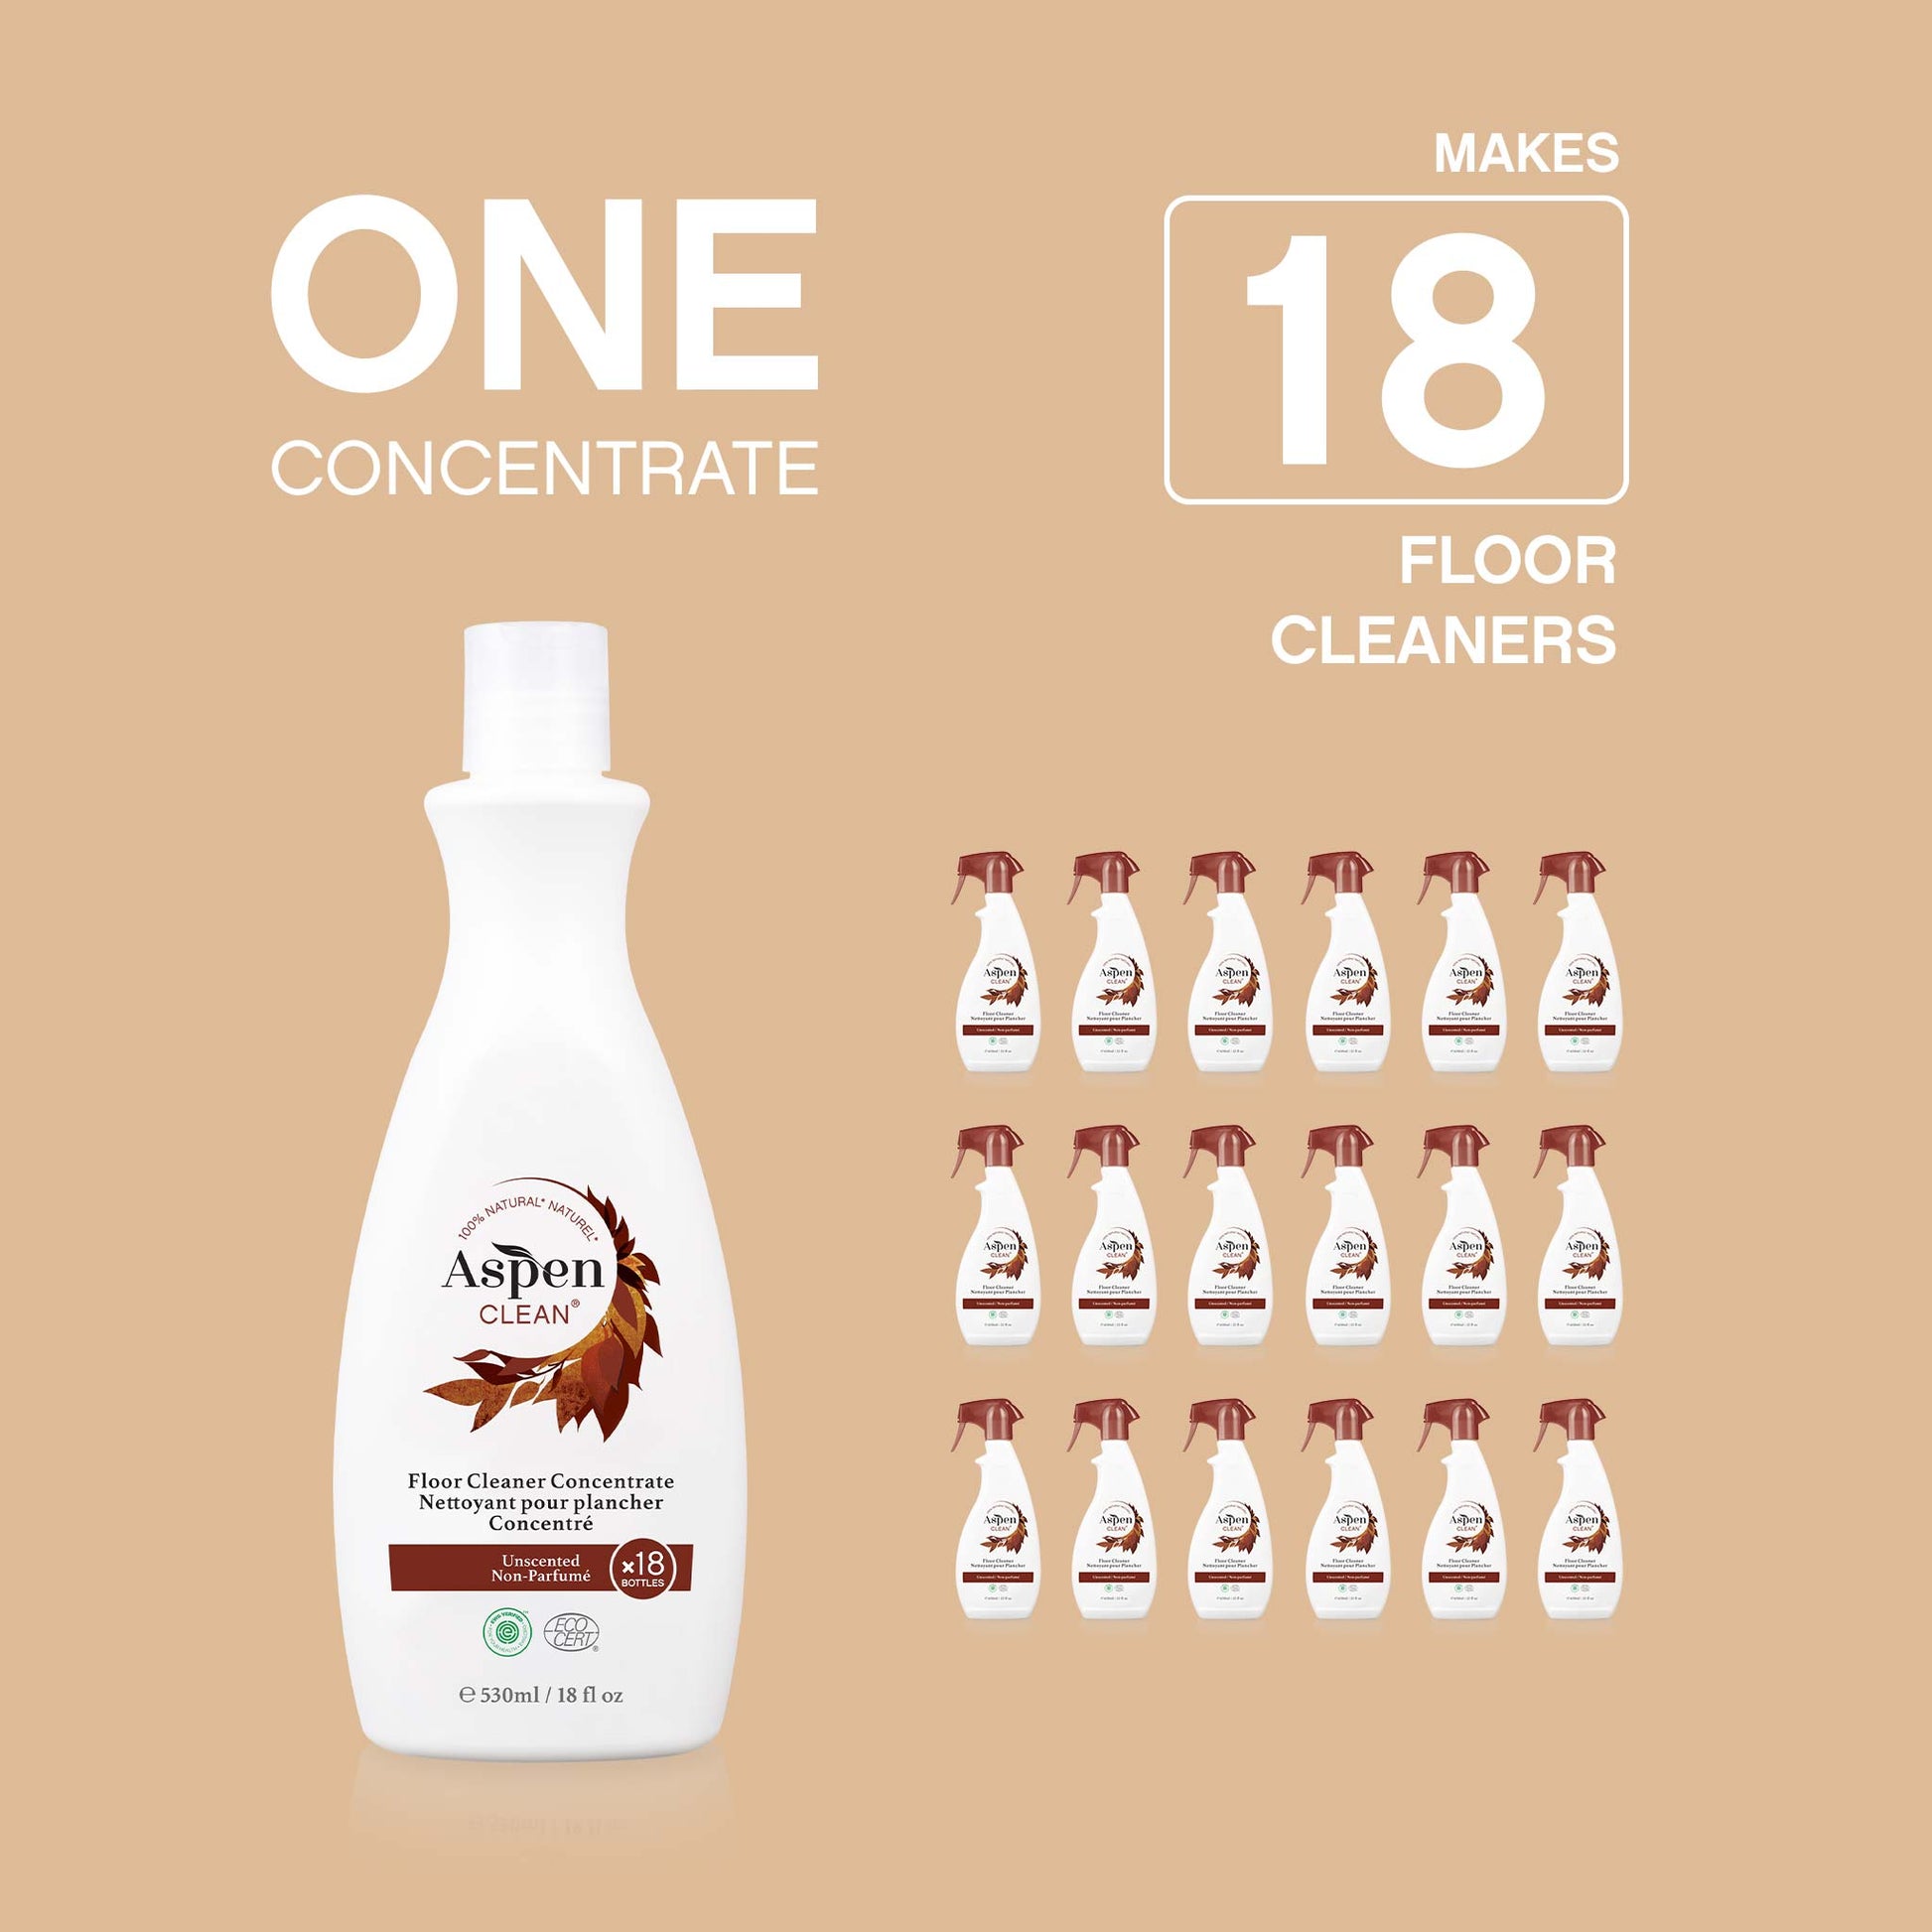 Floor Cleaner Concentrate organic ingredients